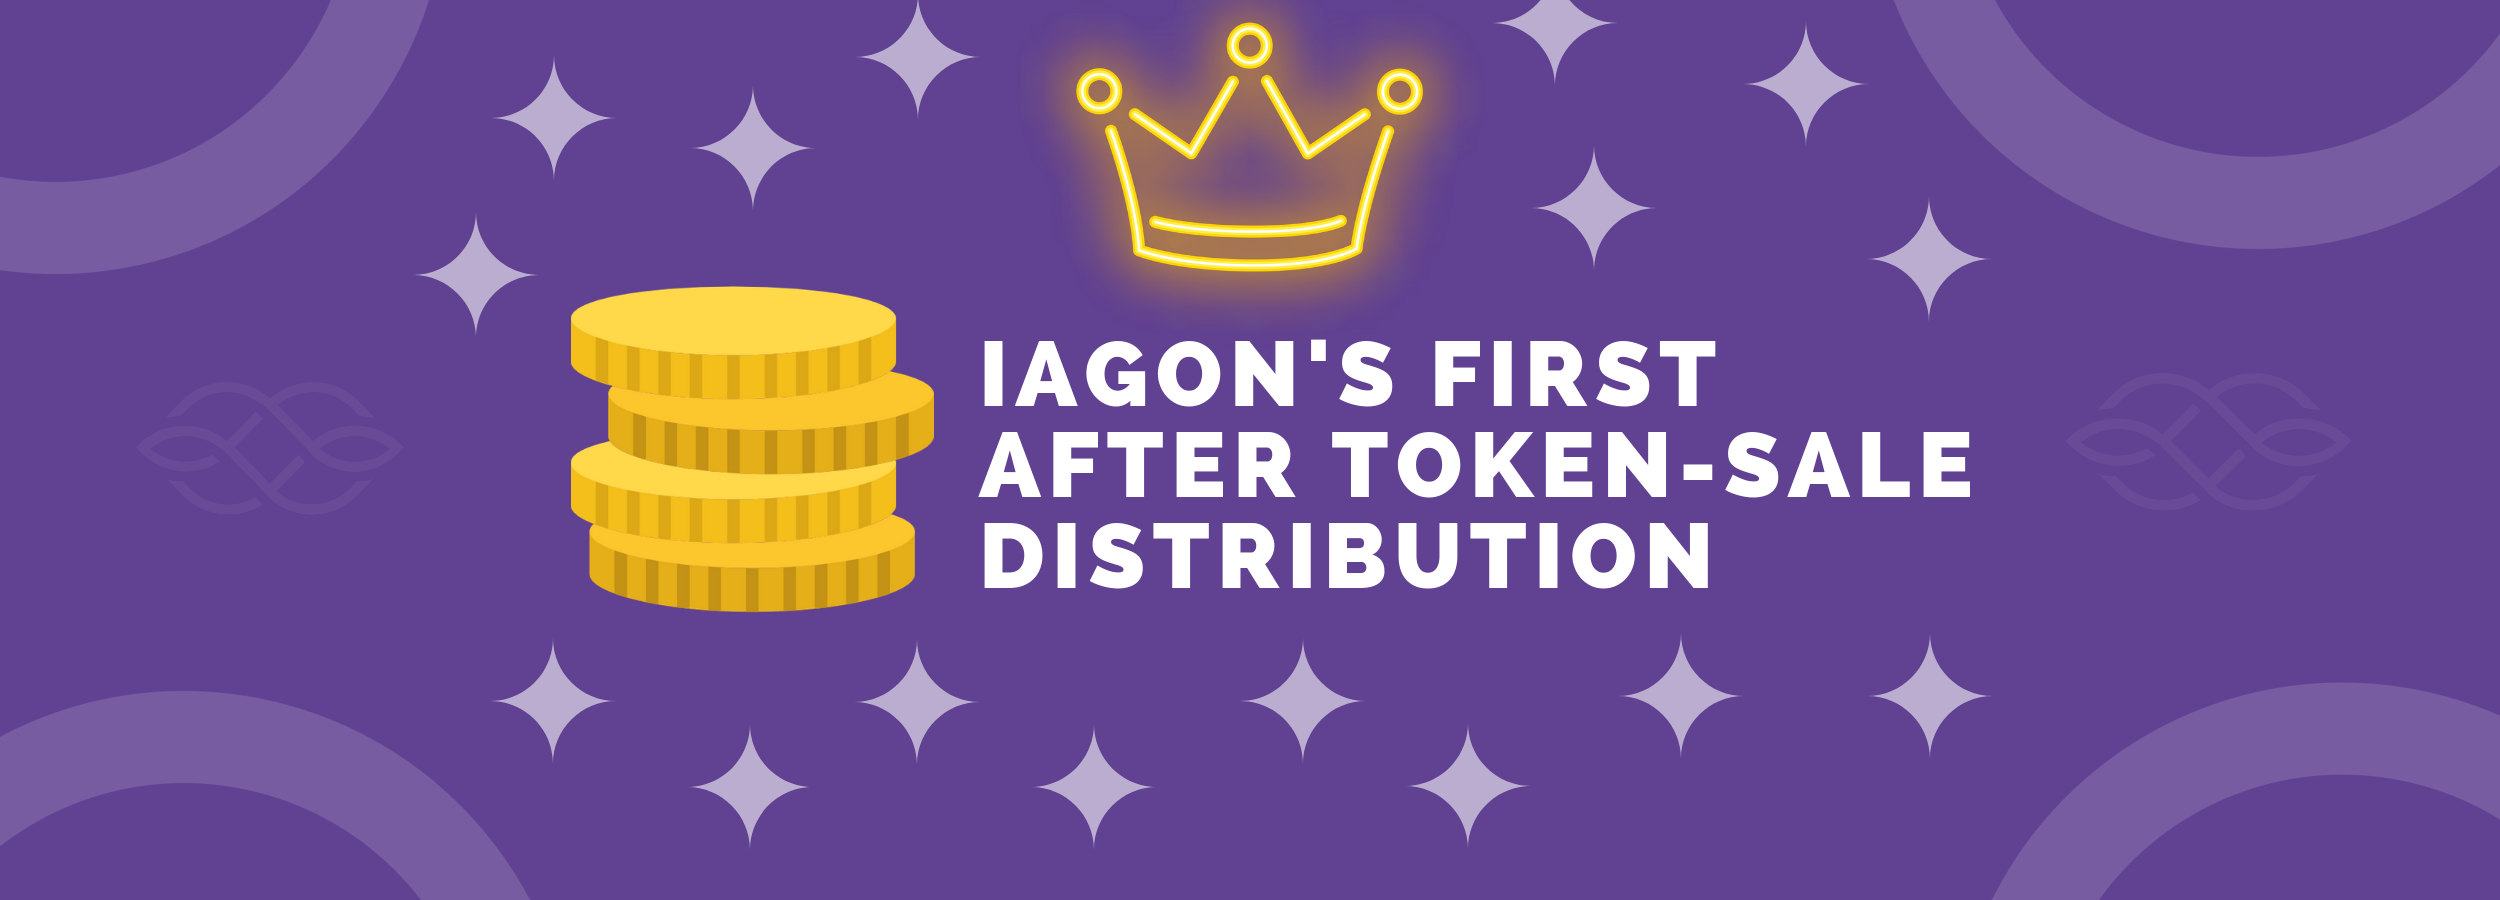 IAGON’s First After Token-sale Distribution